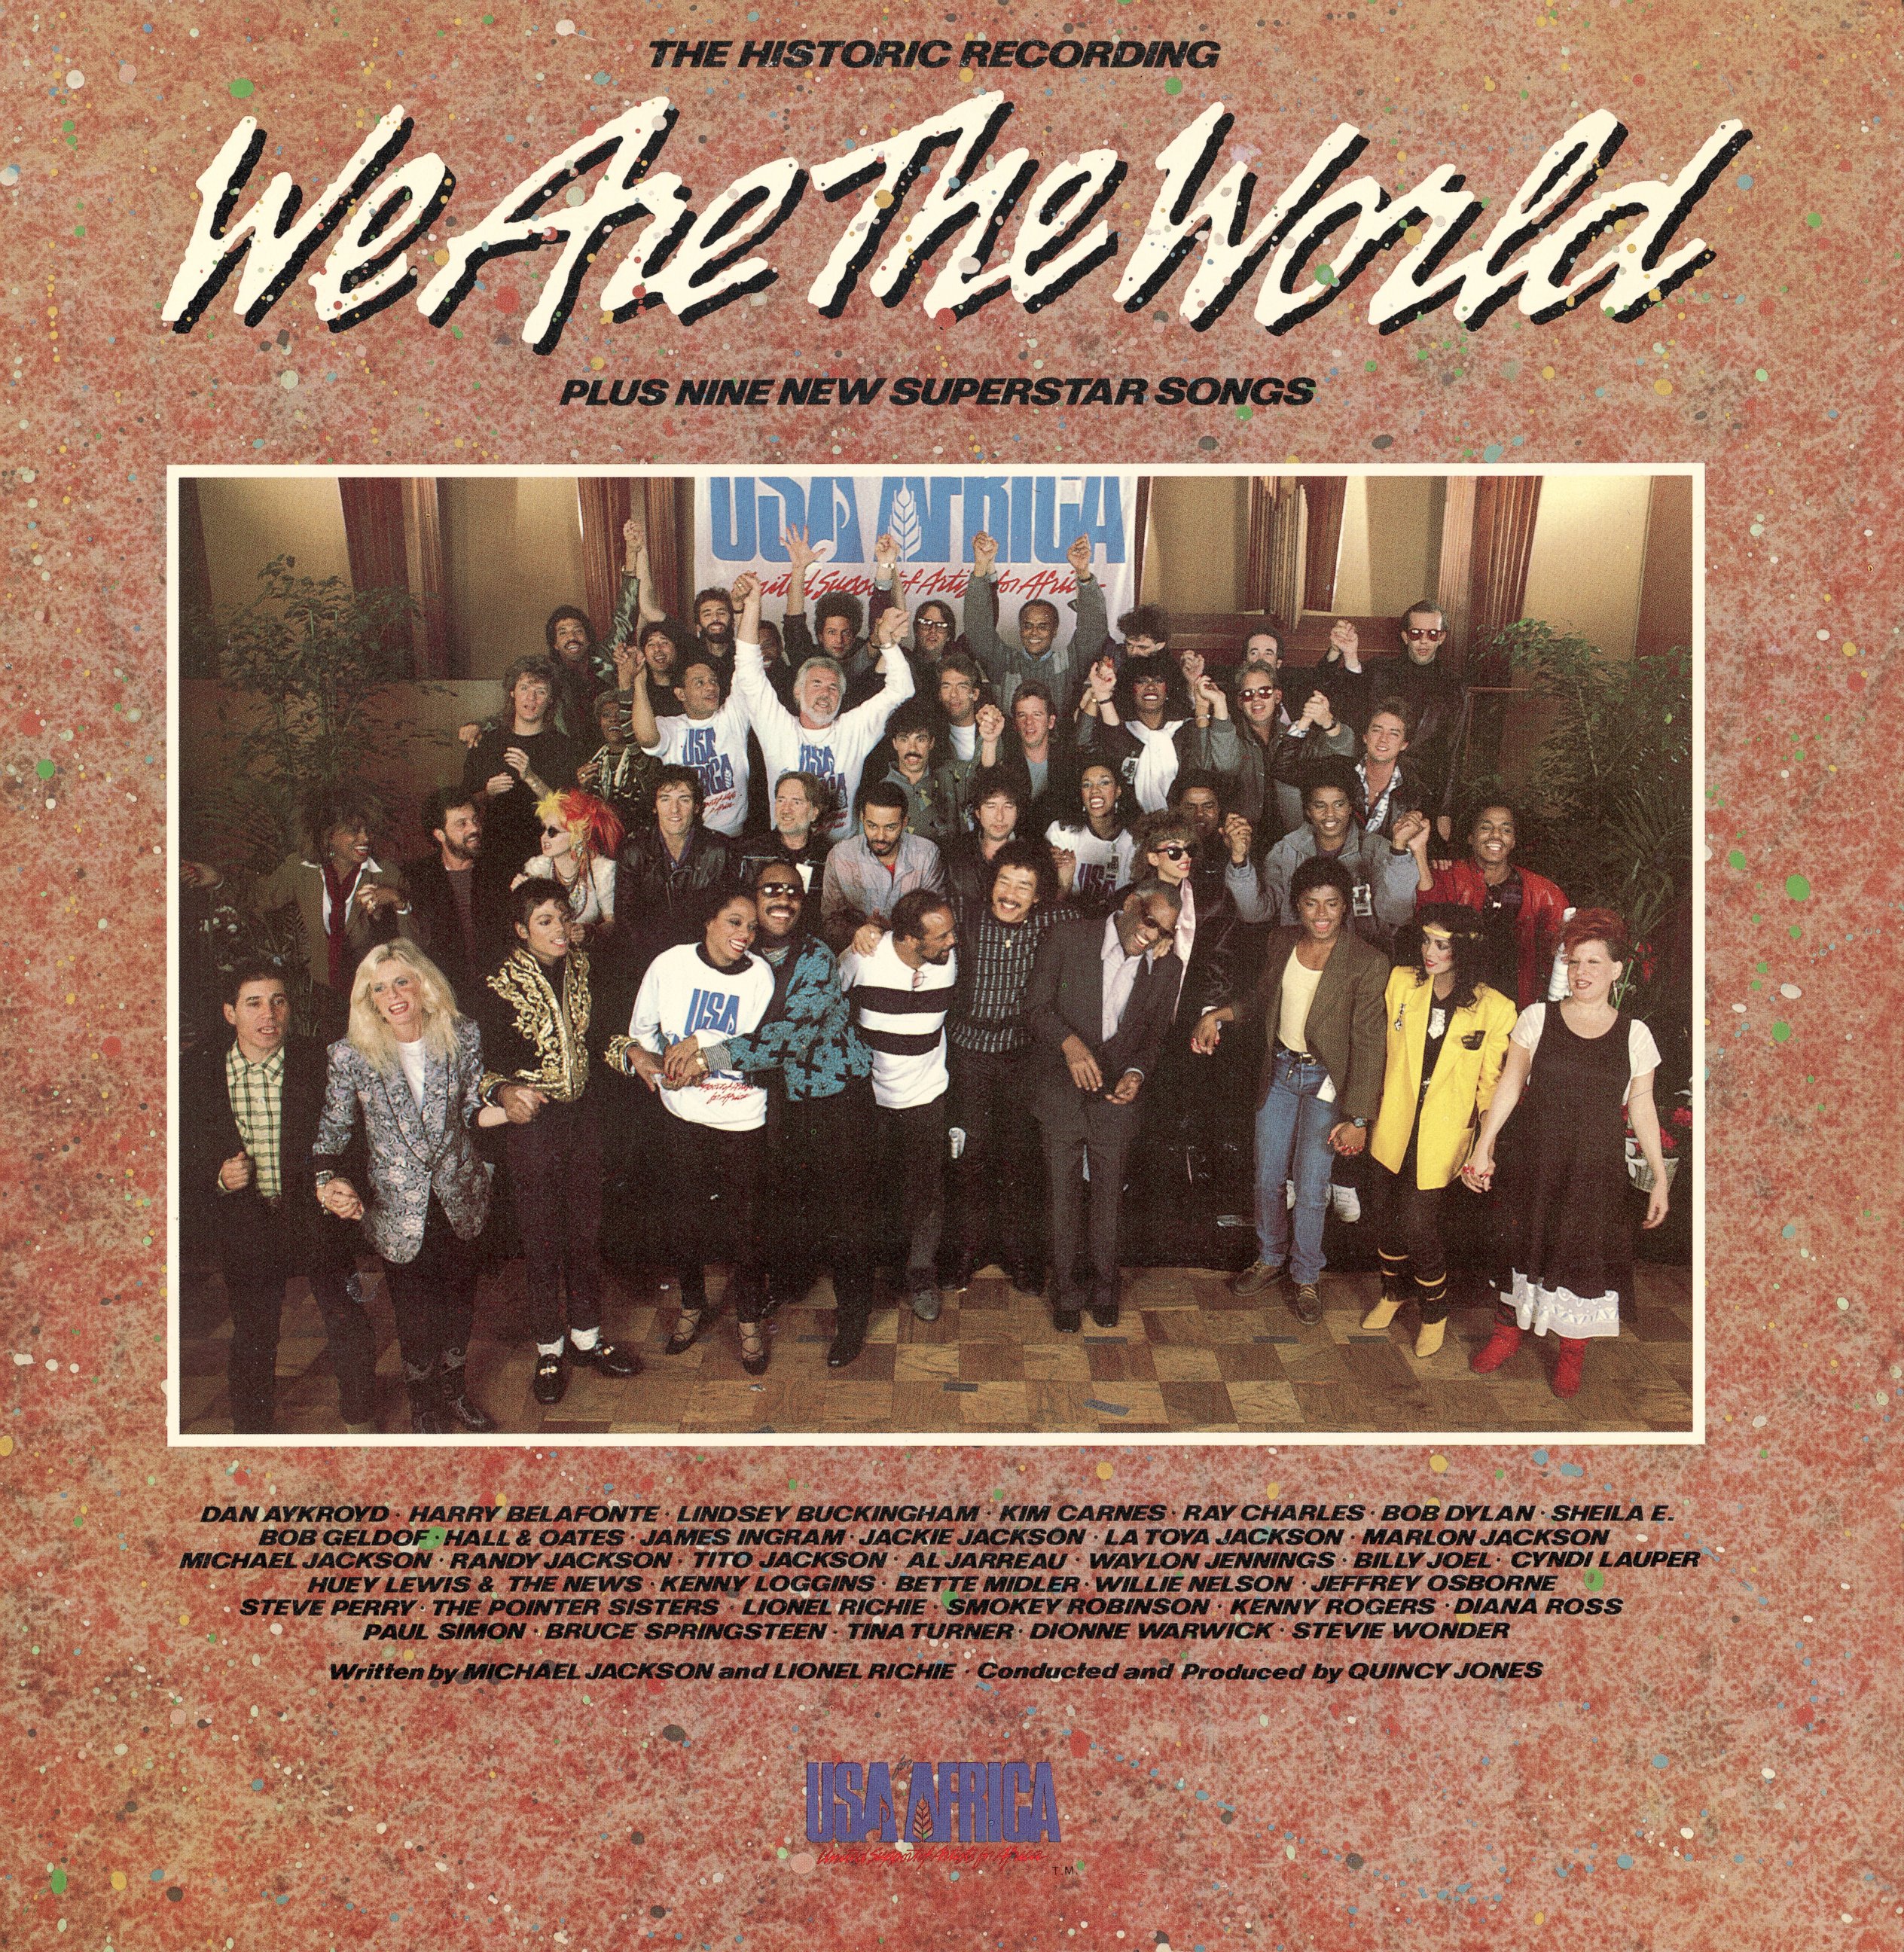 PHOTO: Front cover of the 'USA for Africa We are the World' record album.